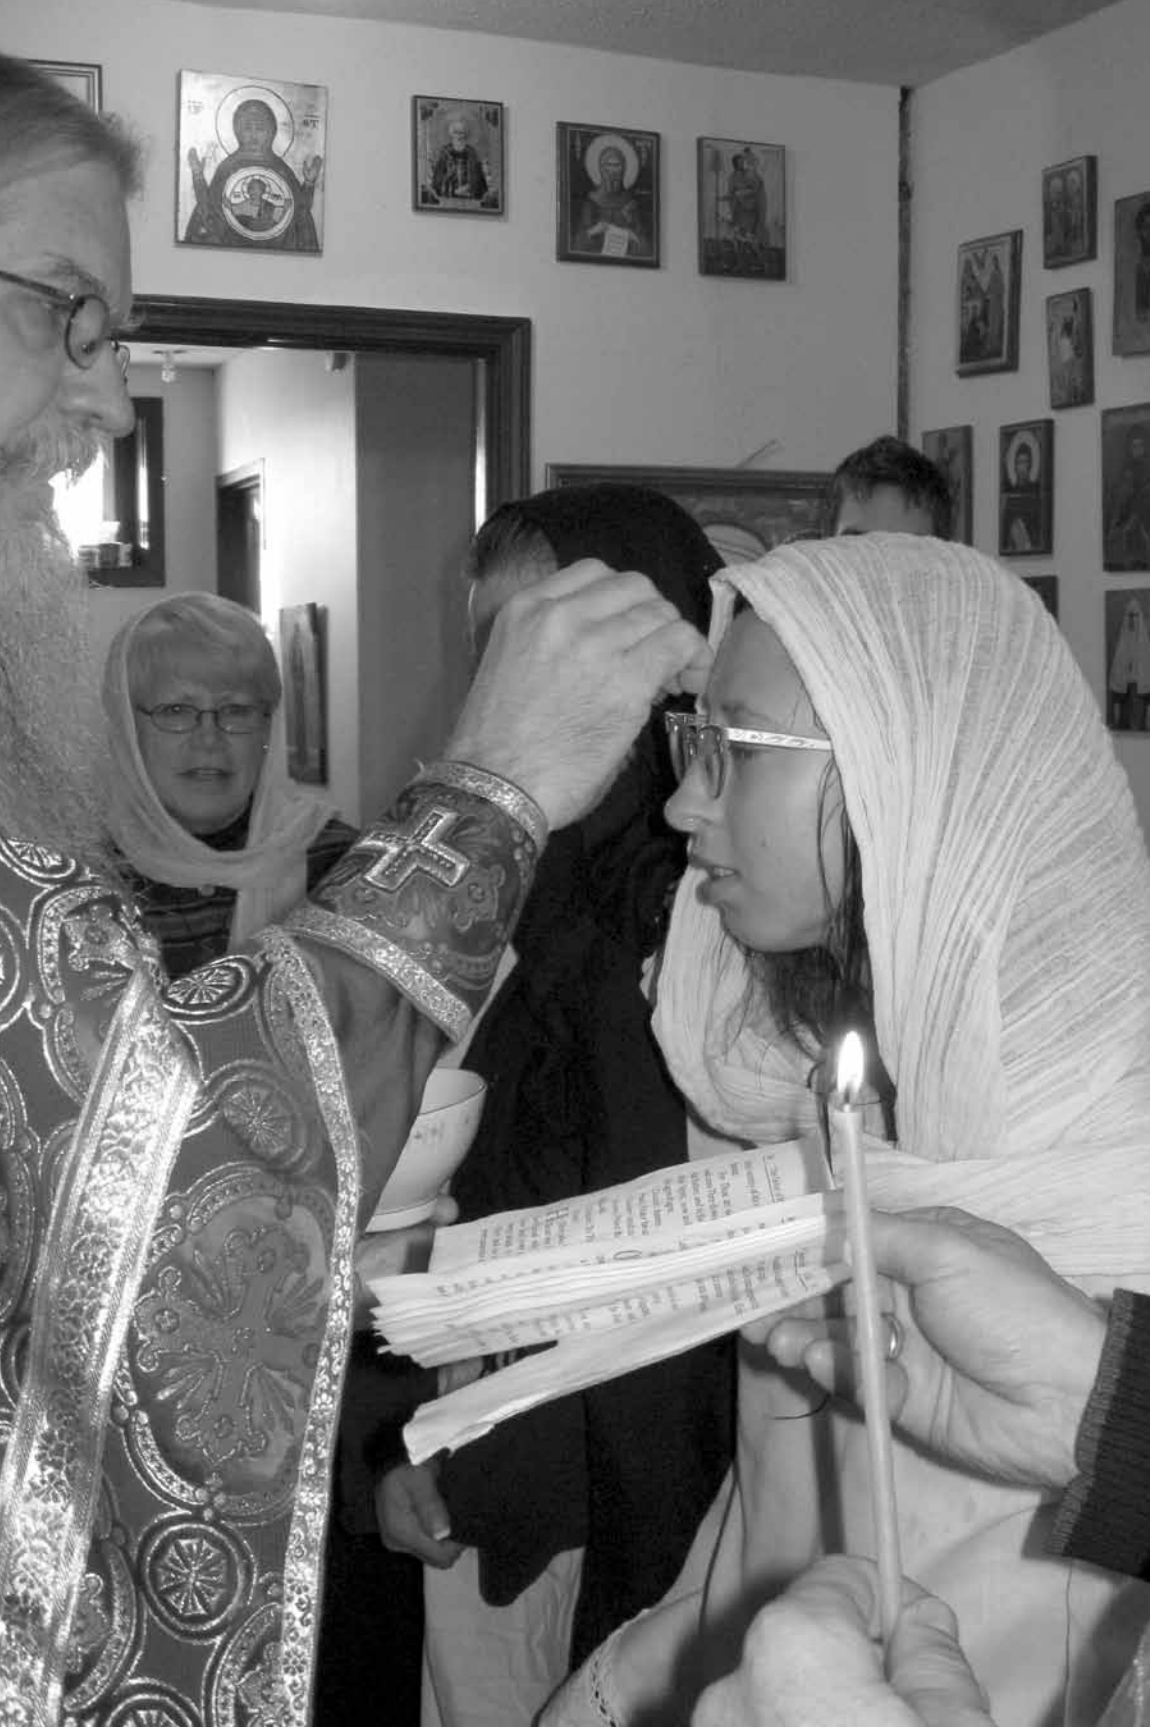 Baptism of Rainbow (Xenia) Lundeen by Fr. Paisius Altschul at St. Mary of Egypt Serbian Orthodox Church, Kansas City, Missouri.